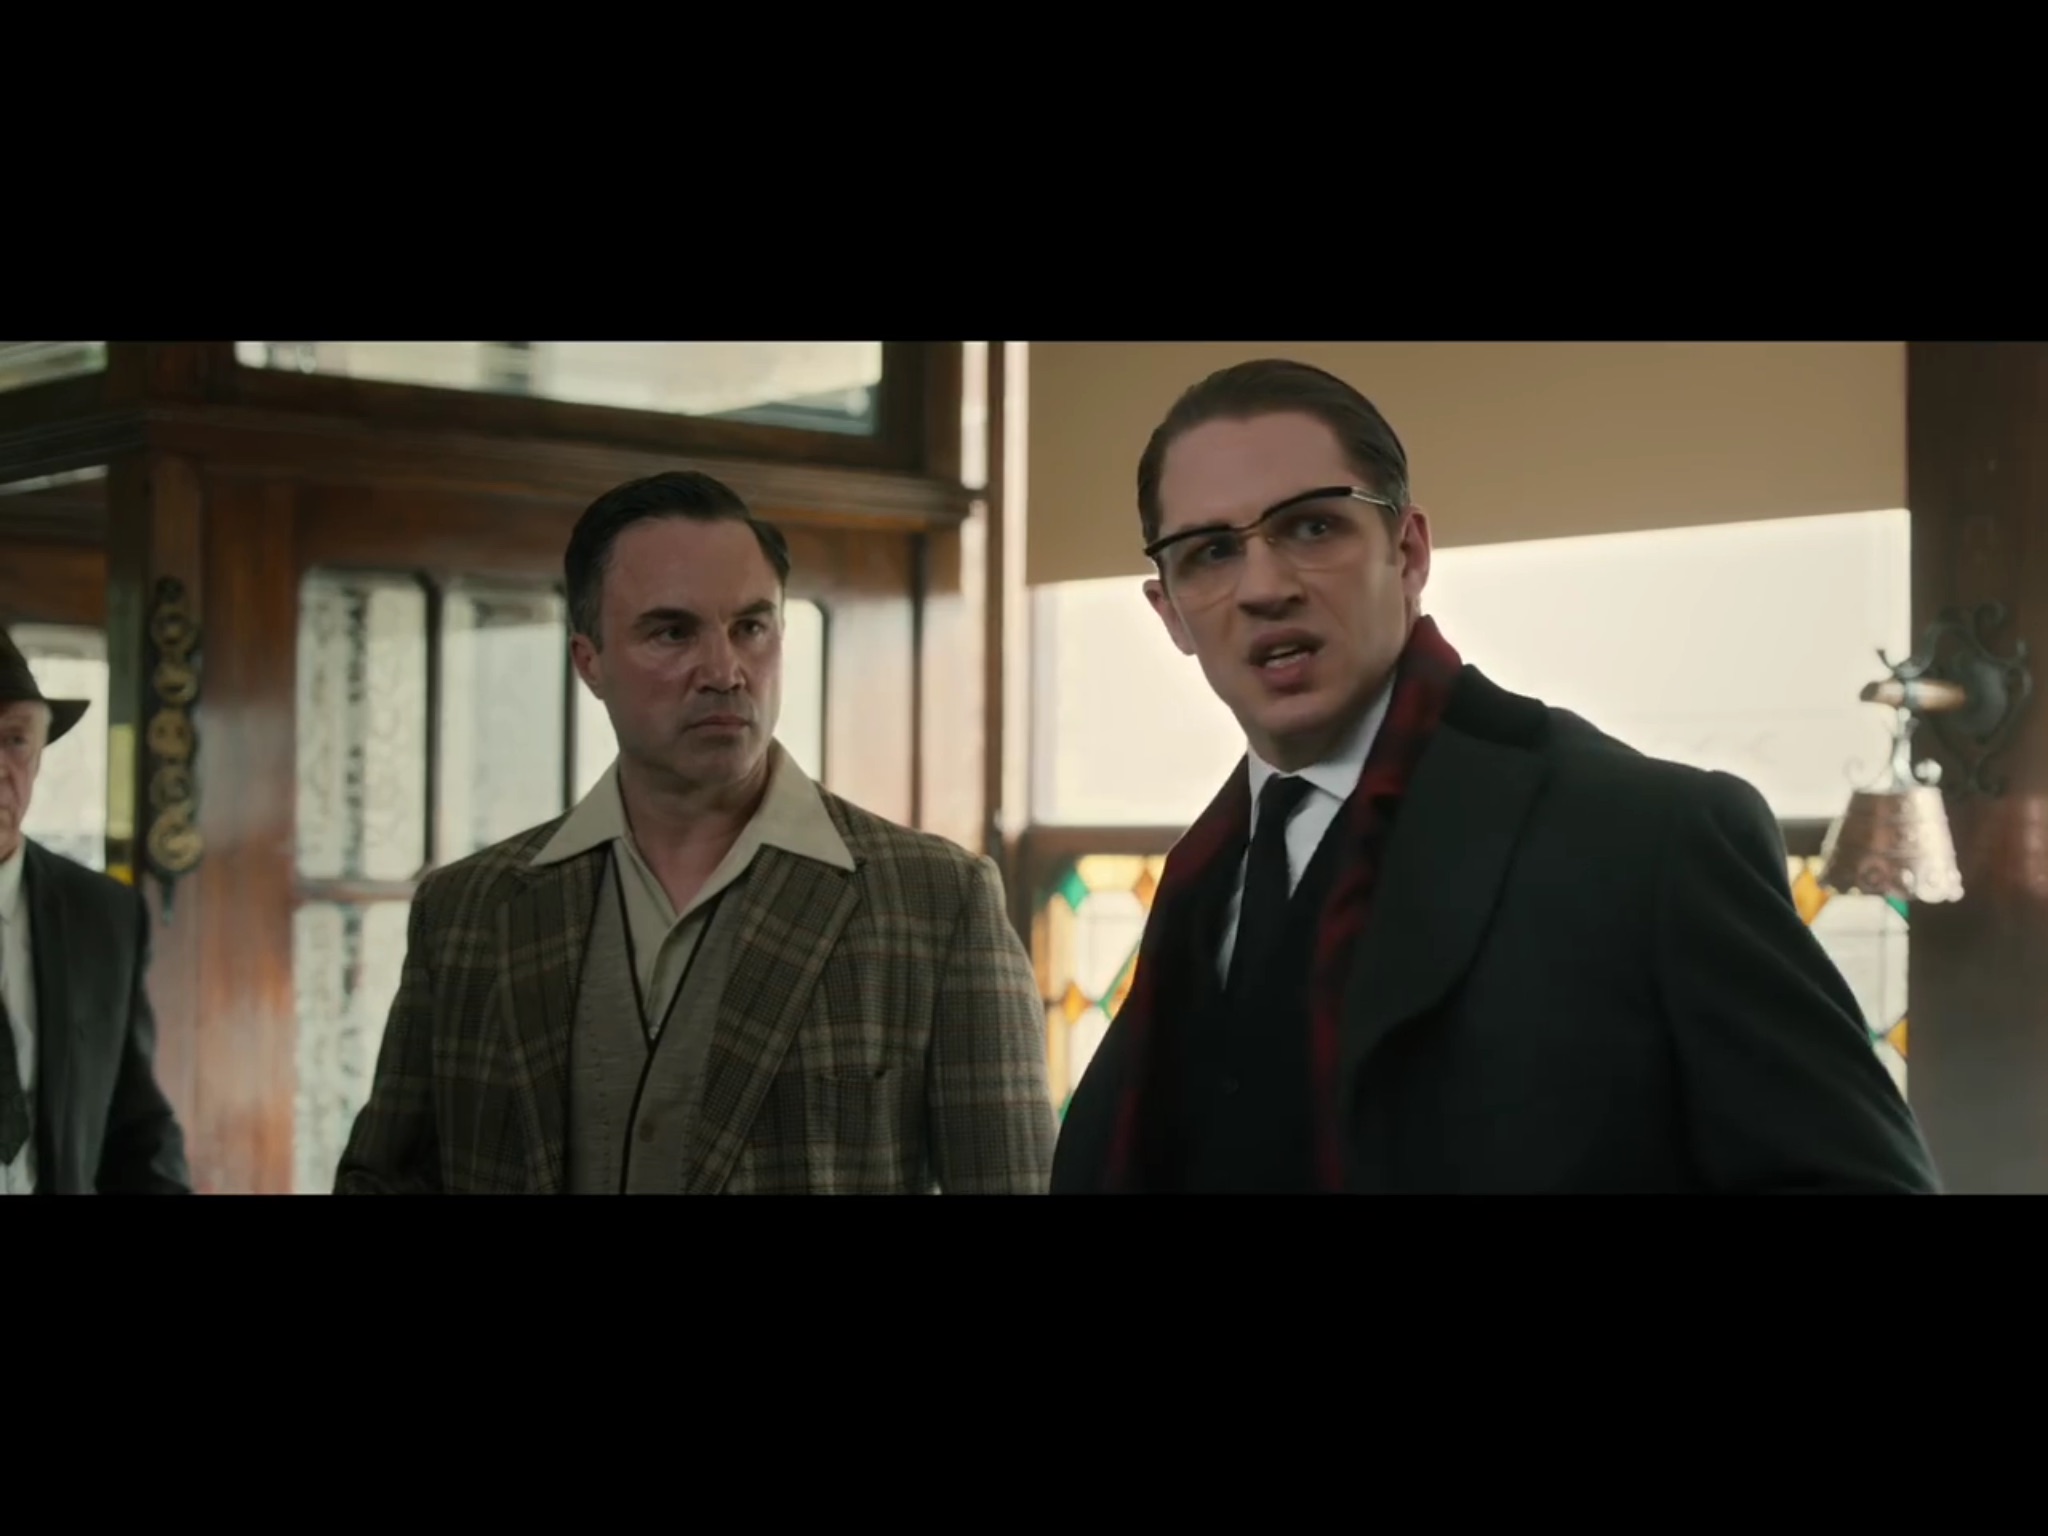 Still from Legend starring Myself and Tom Hardy